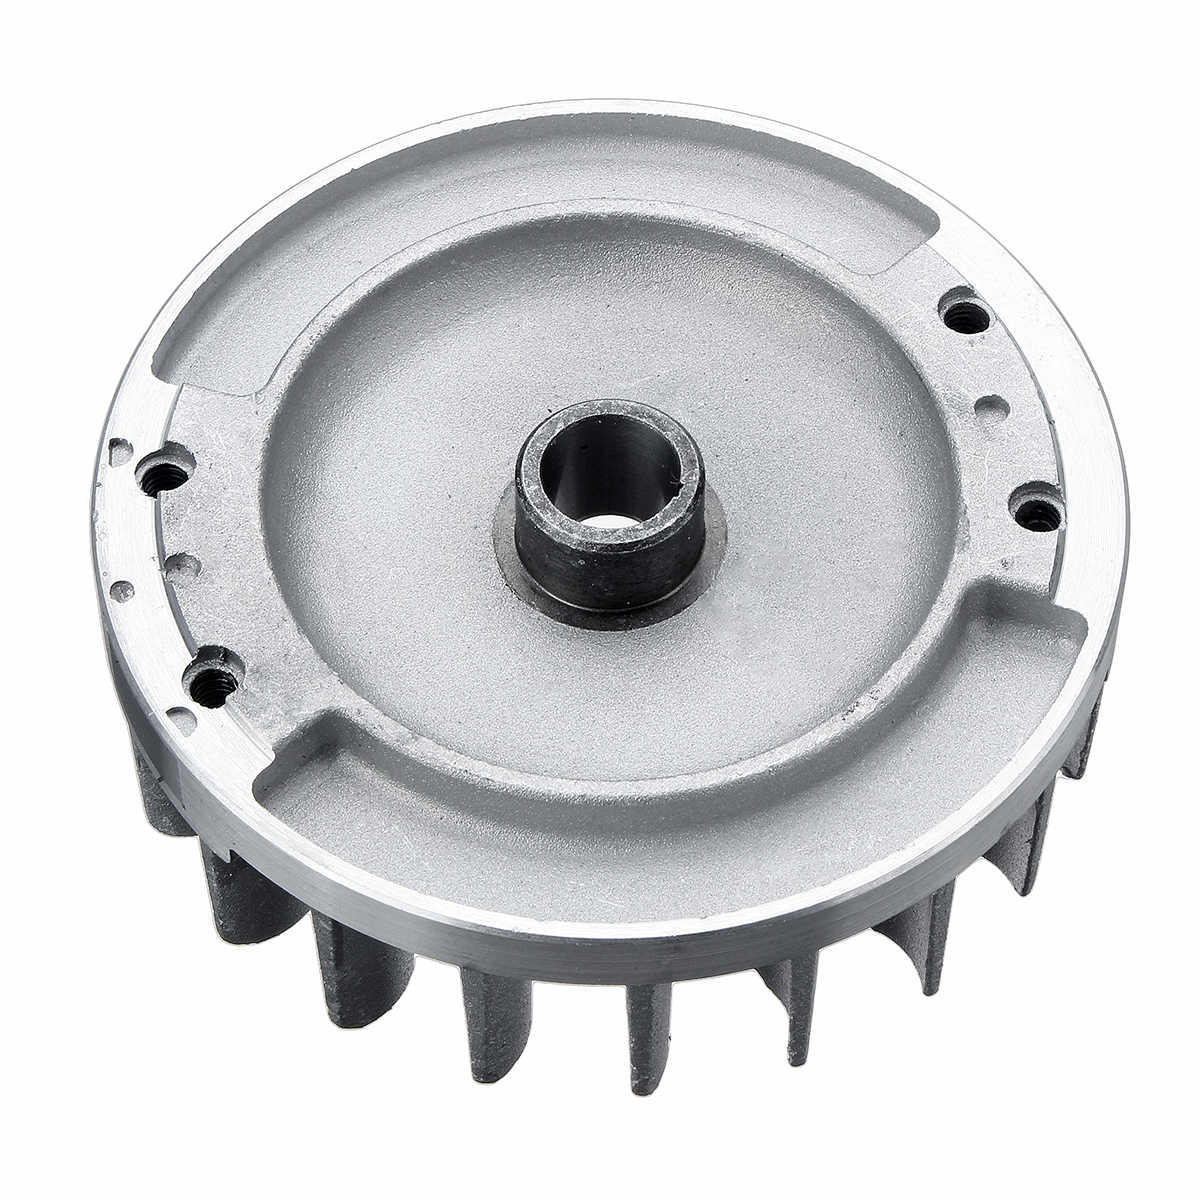 OEM-11224001217-Replacement-Flywheel-Coil-NGK-Plug-for-Stihl-Electric-Chainsaw-066-MS660-1631889-8